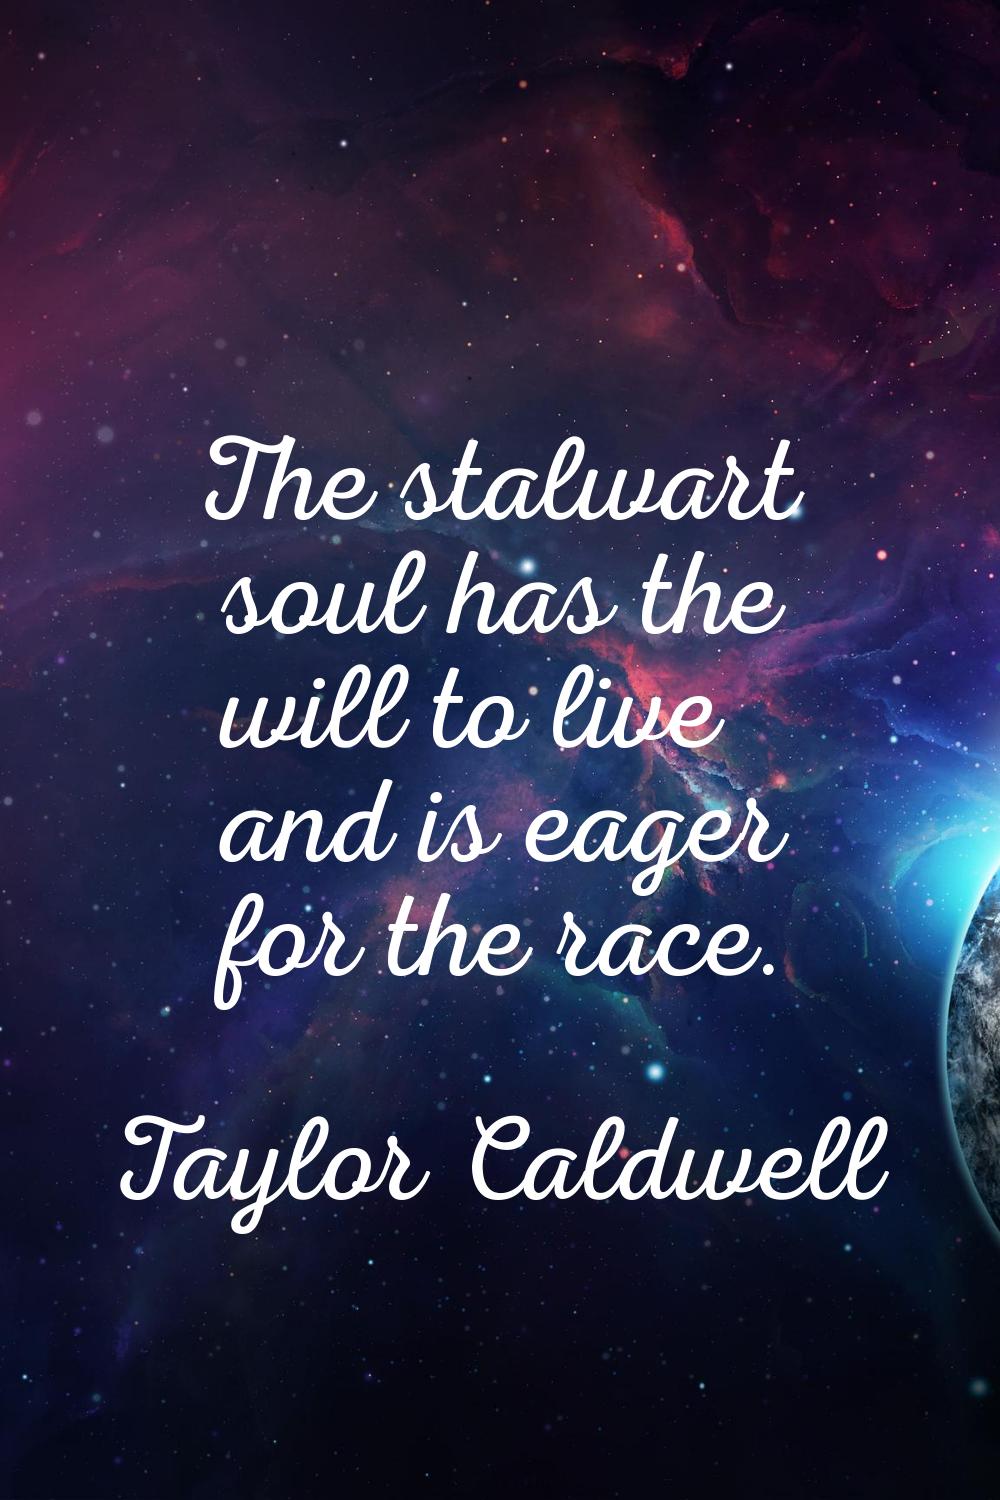 The stalwart soul has the will to live and is eager for the race.